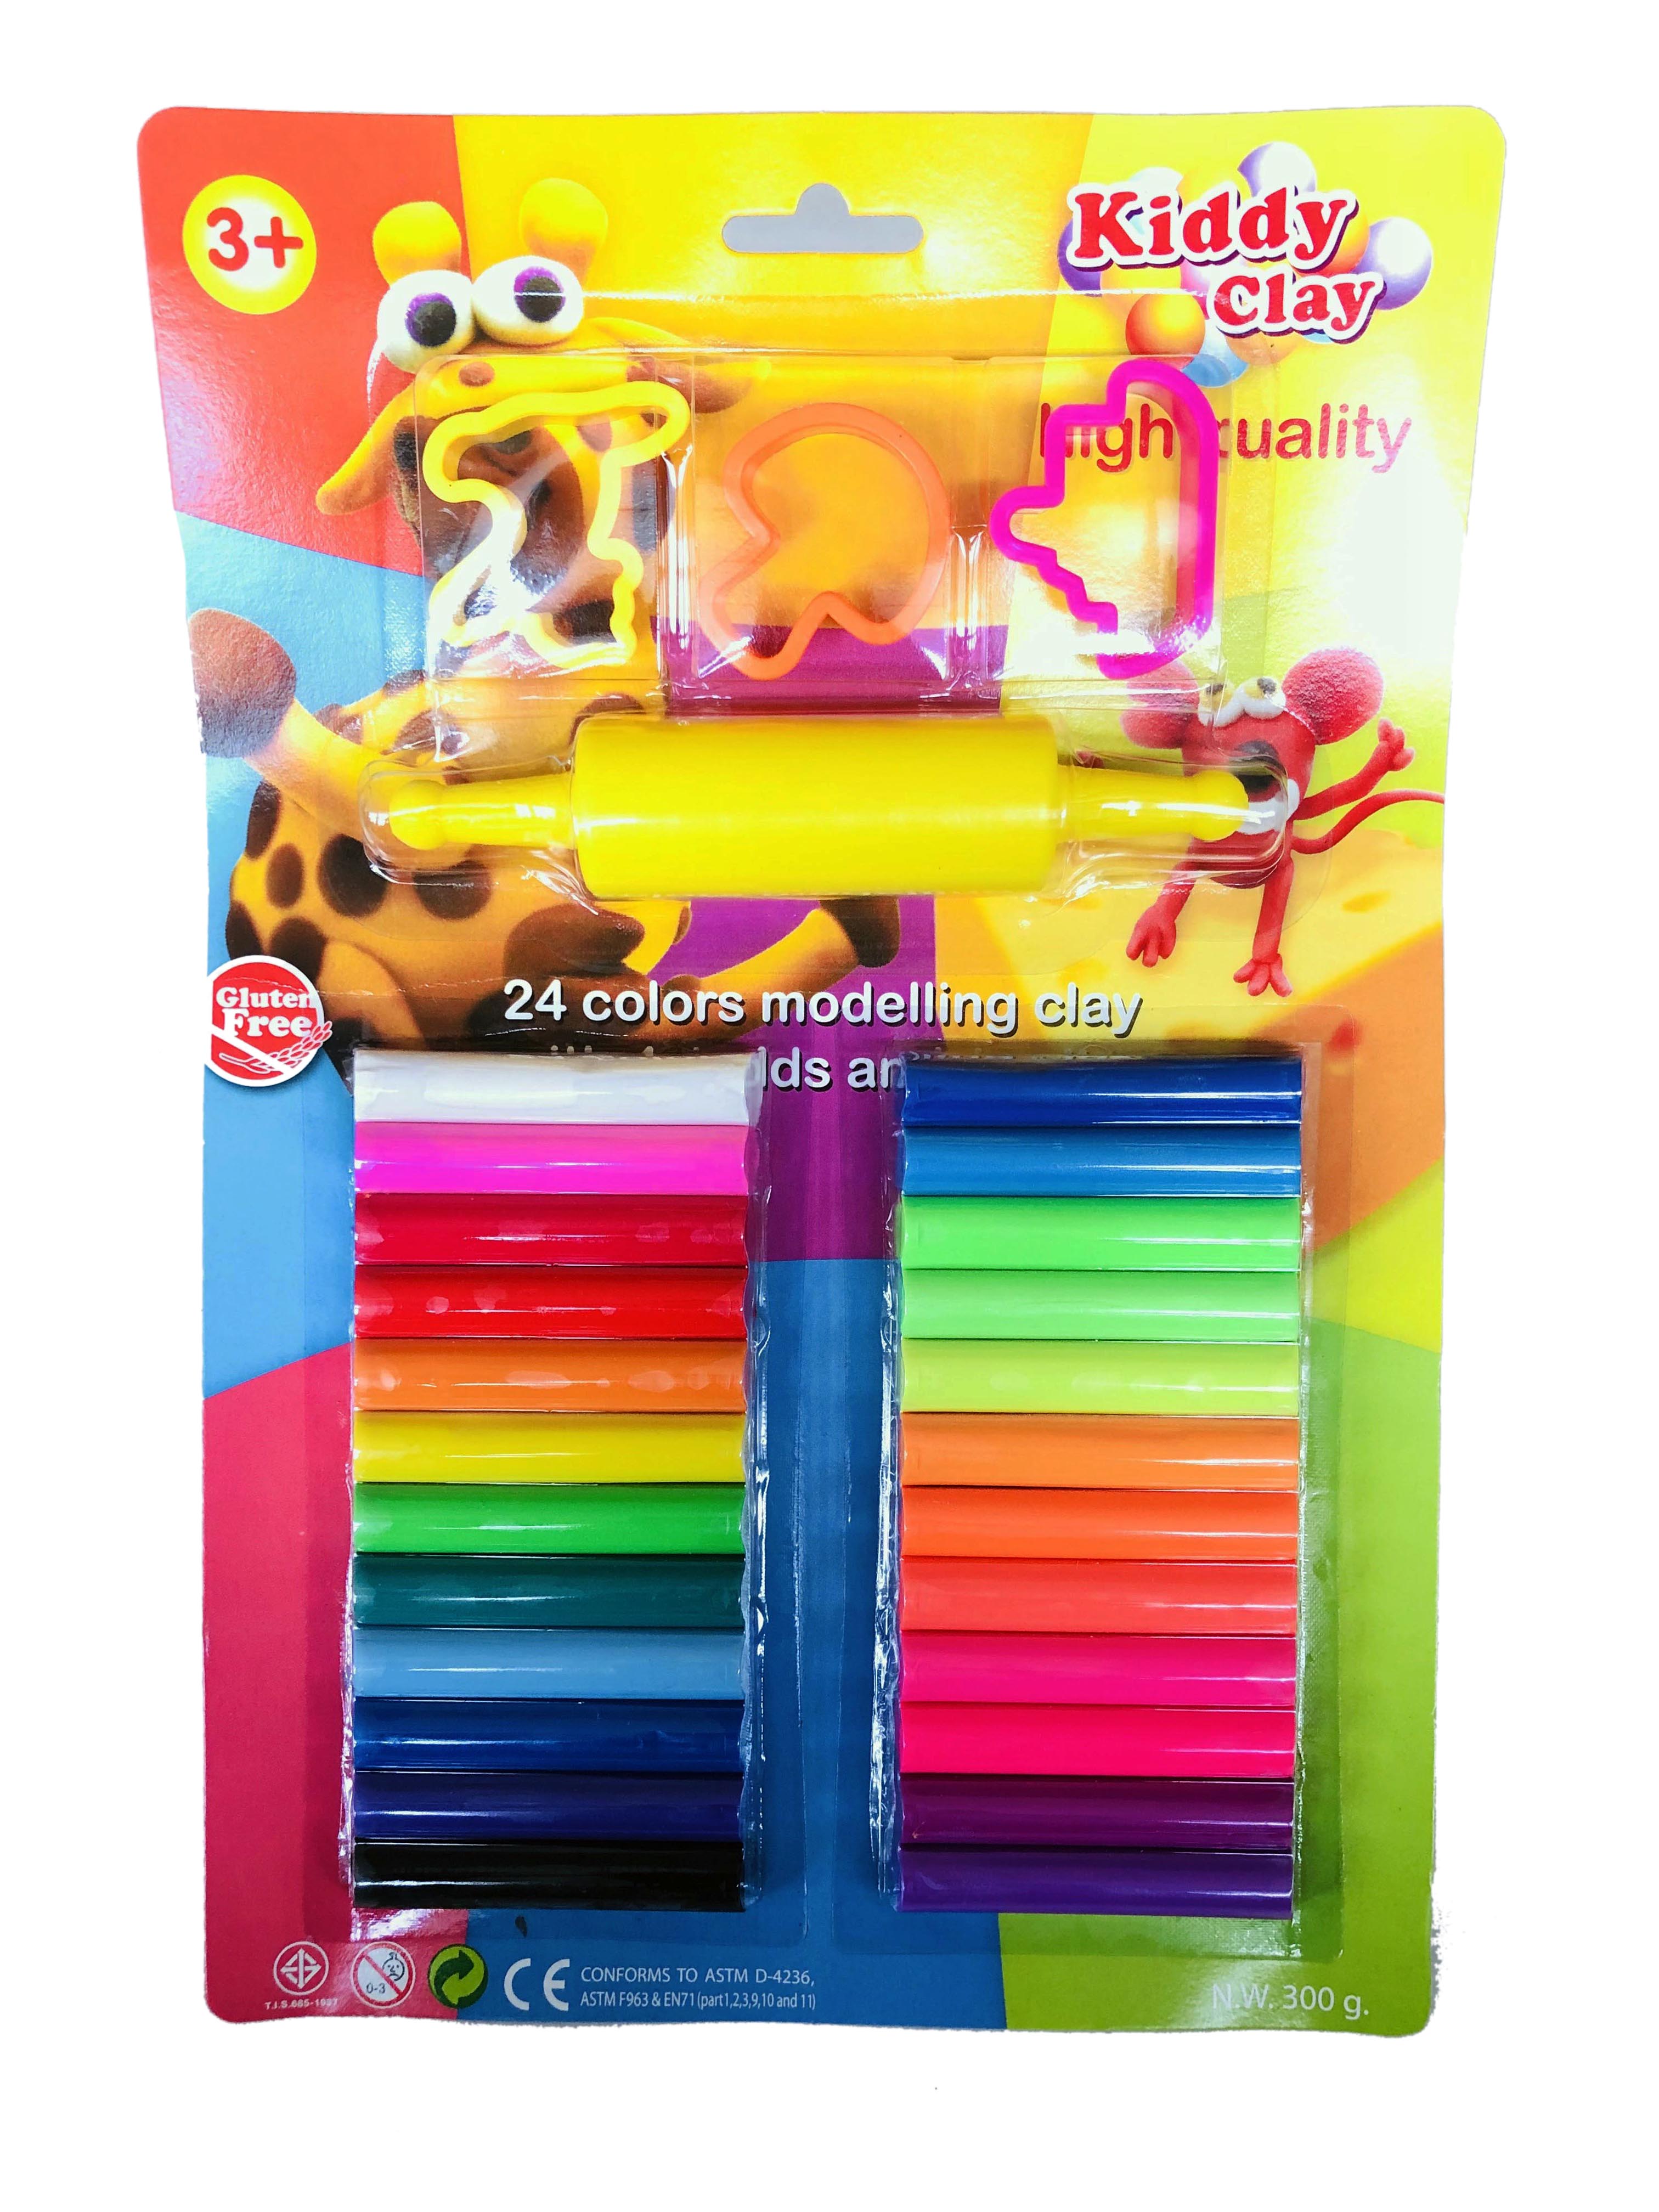 Kiddy Clay High Quality 24 Shades  modeling clay 10174451